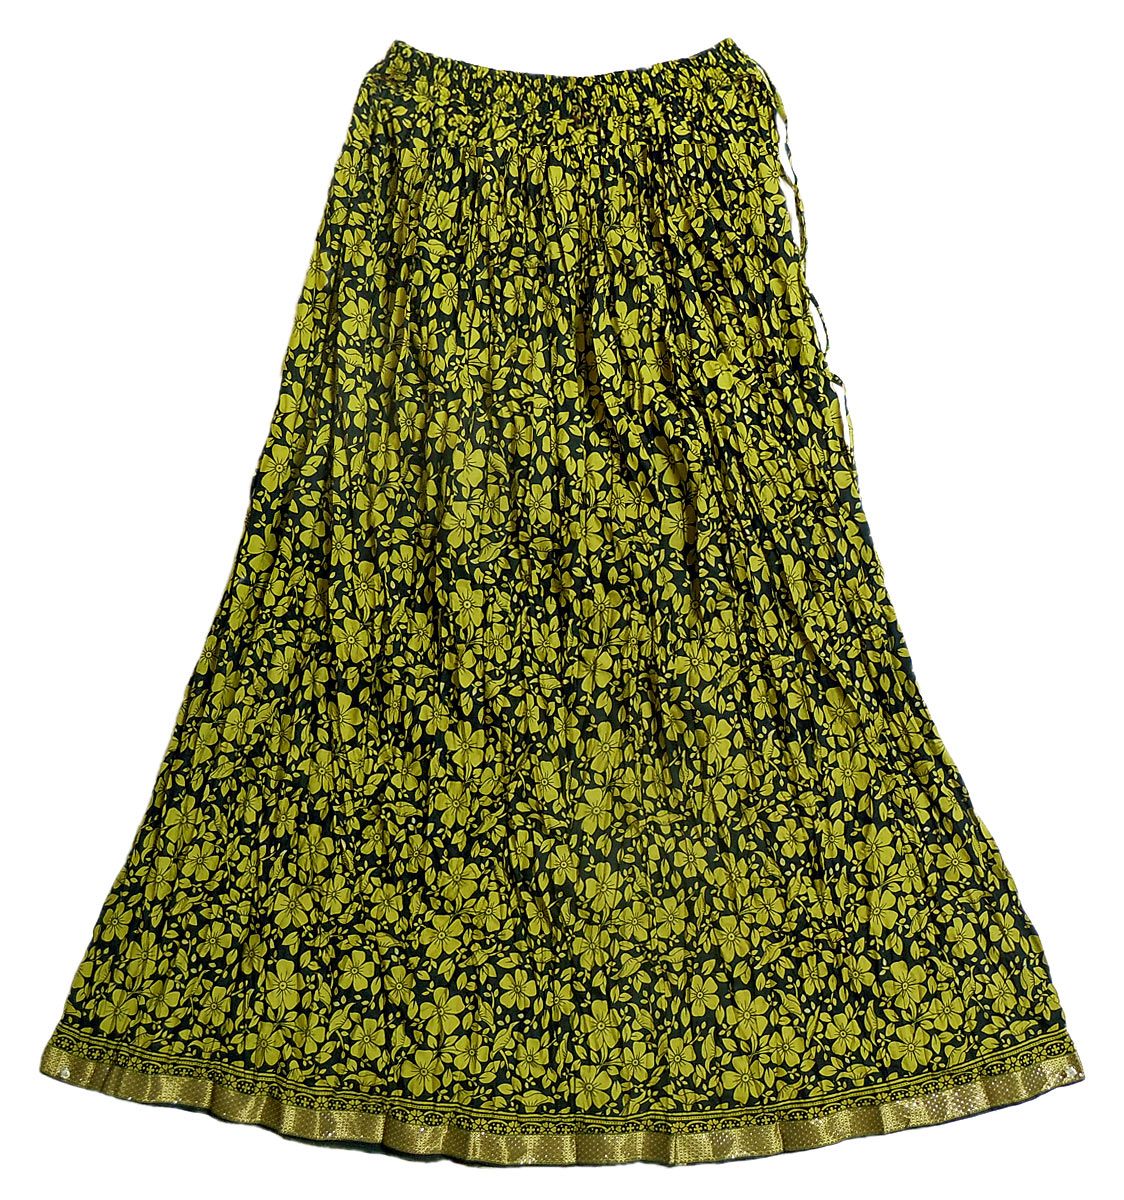 Cotton Crushed Skirt